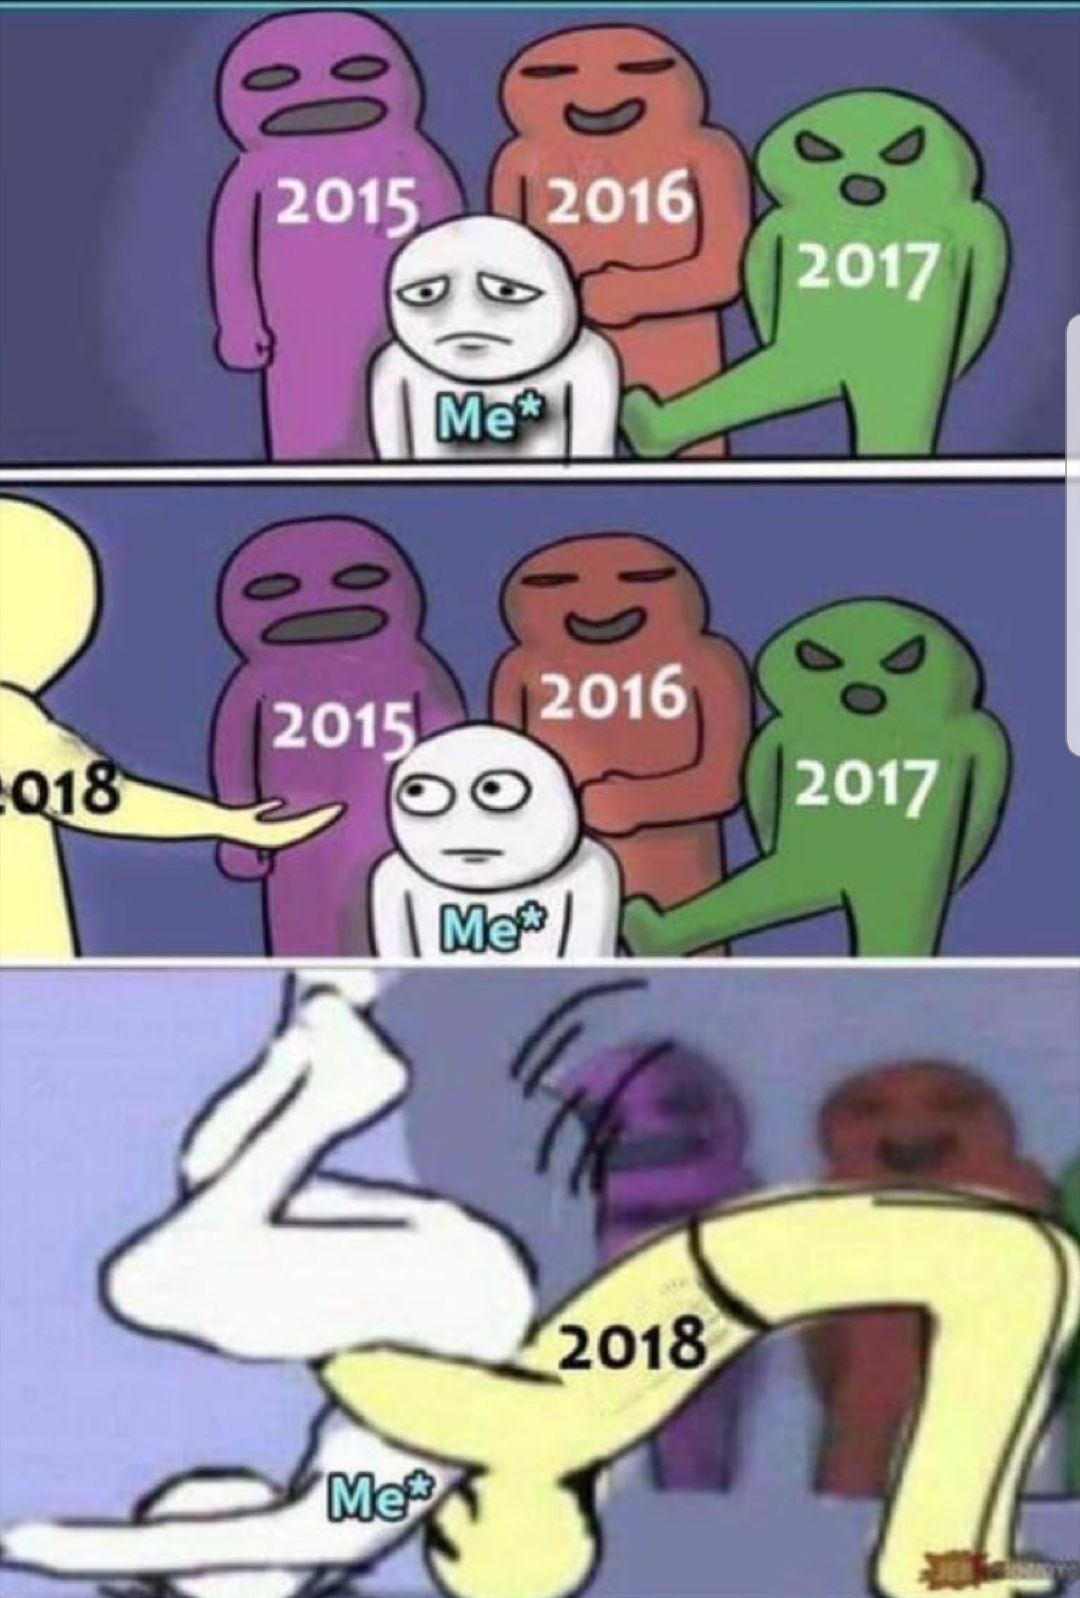 How 2018 went so far compared to other years!